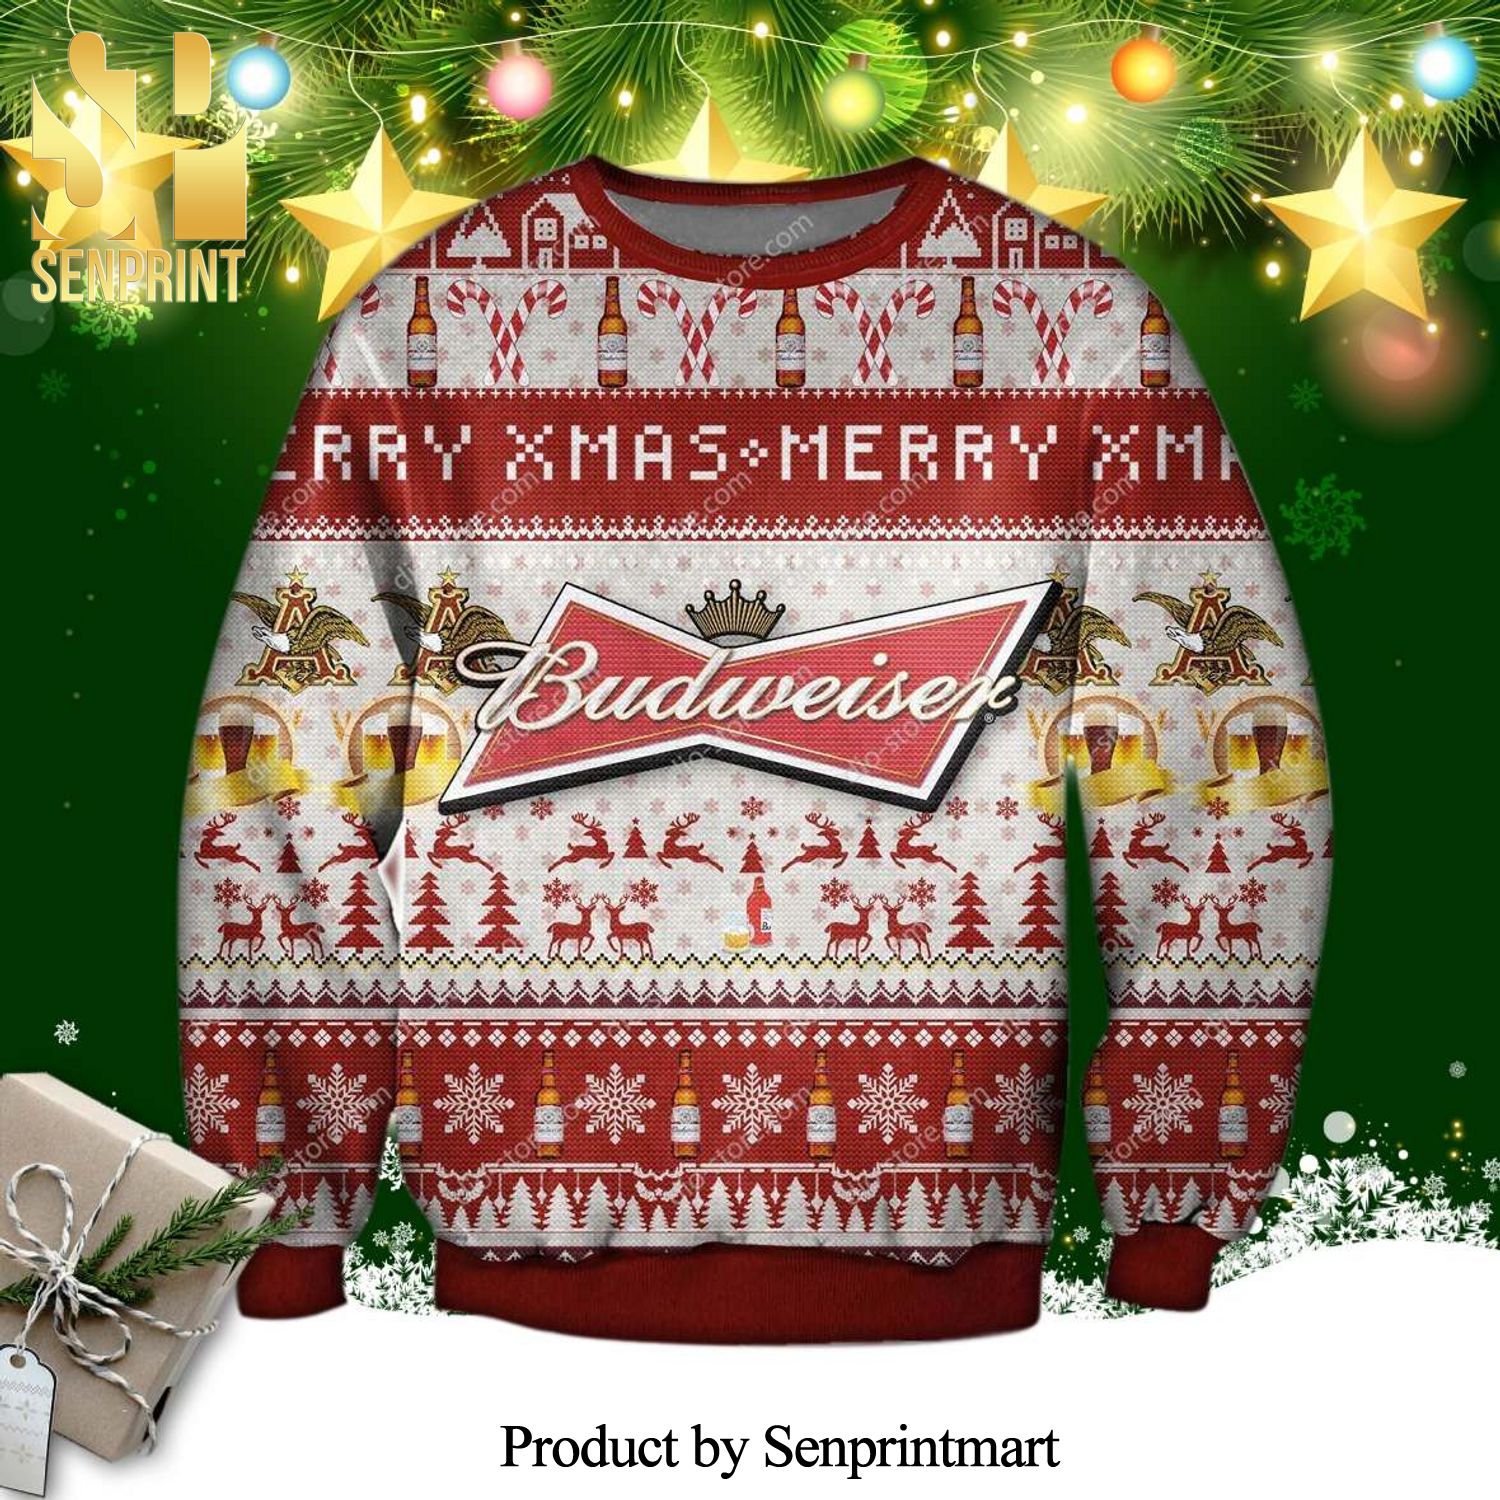 Budweiser Beer Merry Xmas Knitted Ugly Christmas Sweater